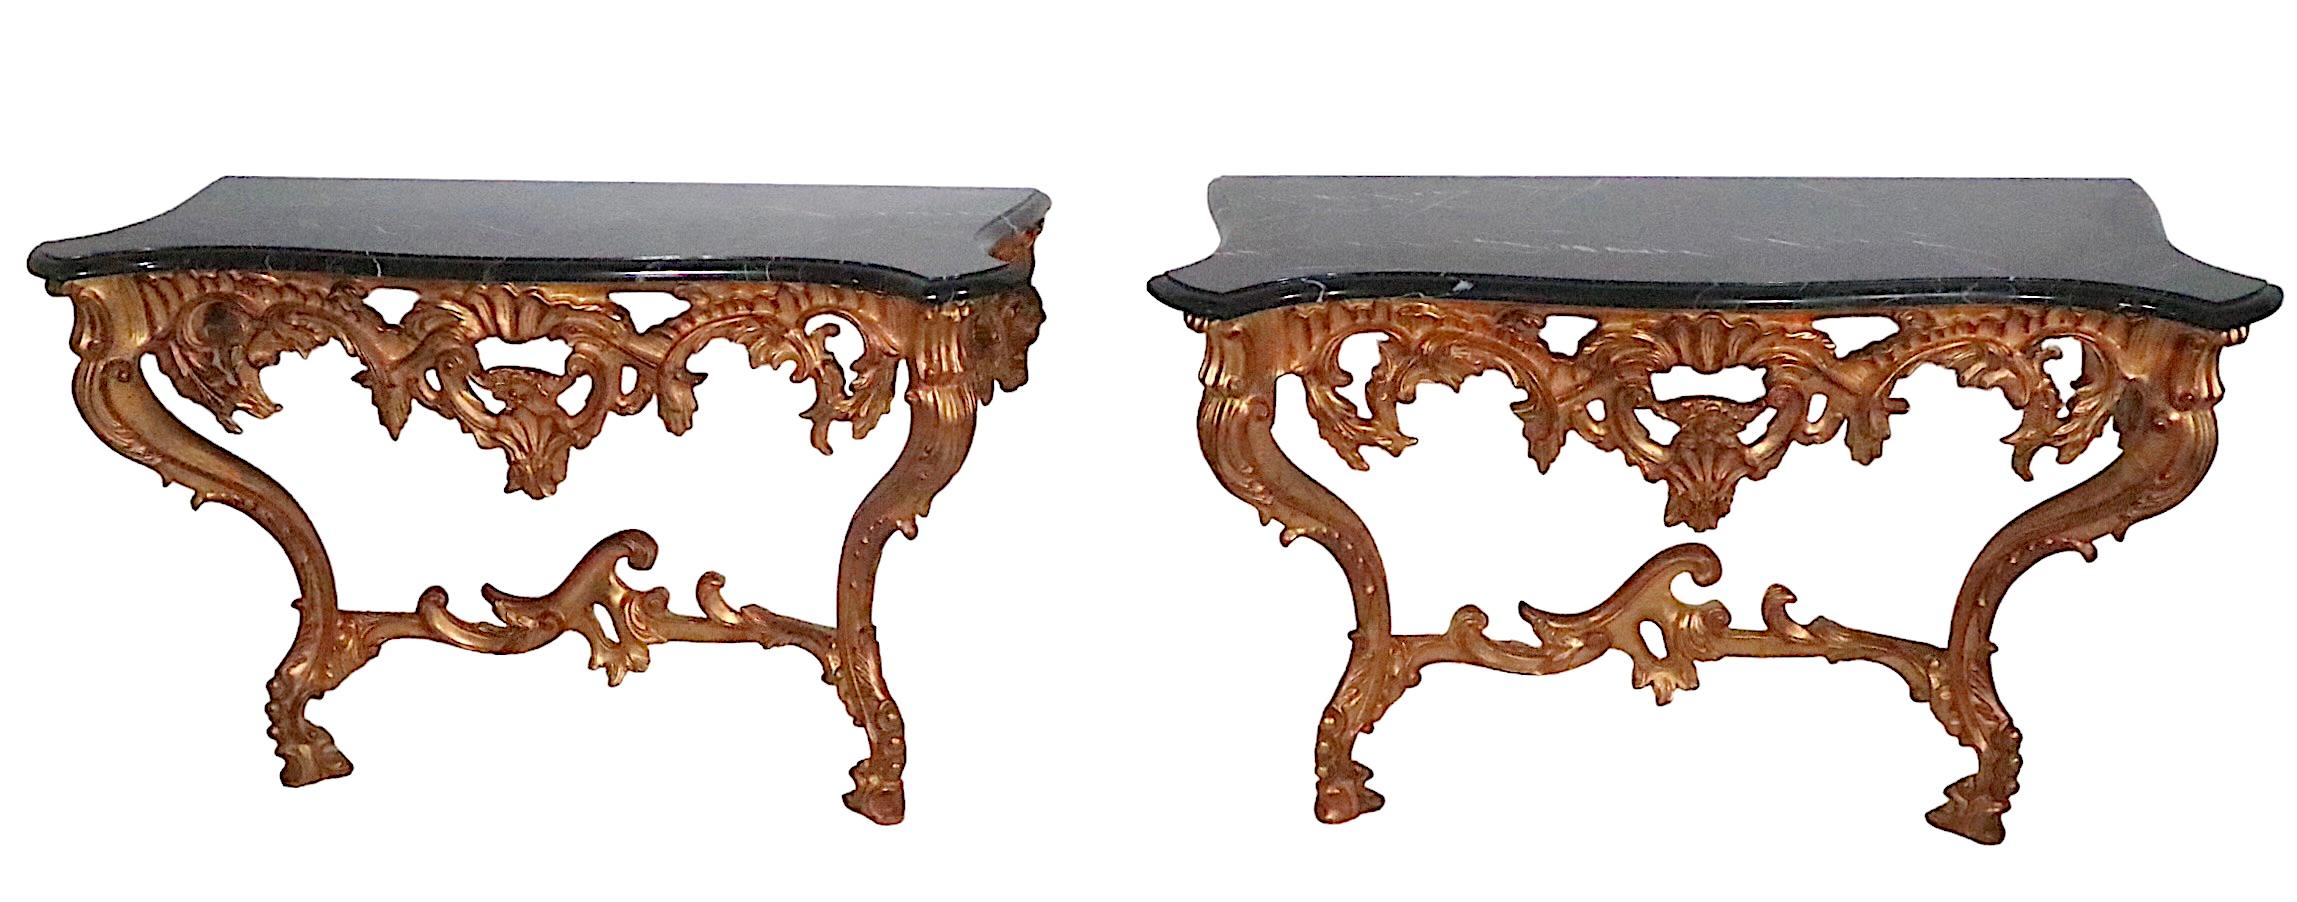 Pr. Louis XV Style Gilt and Marble Consoles Made in Italy 20th C For Sale 10